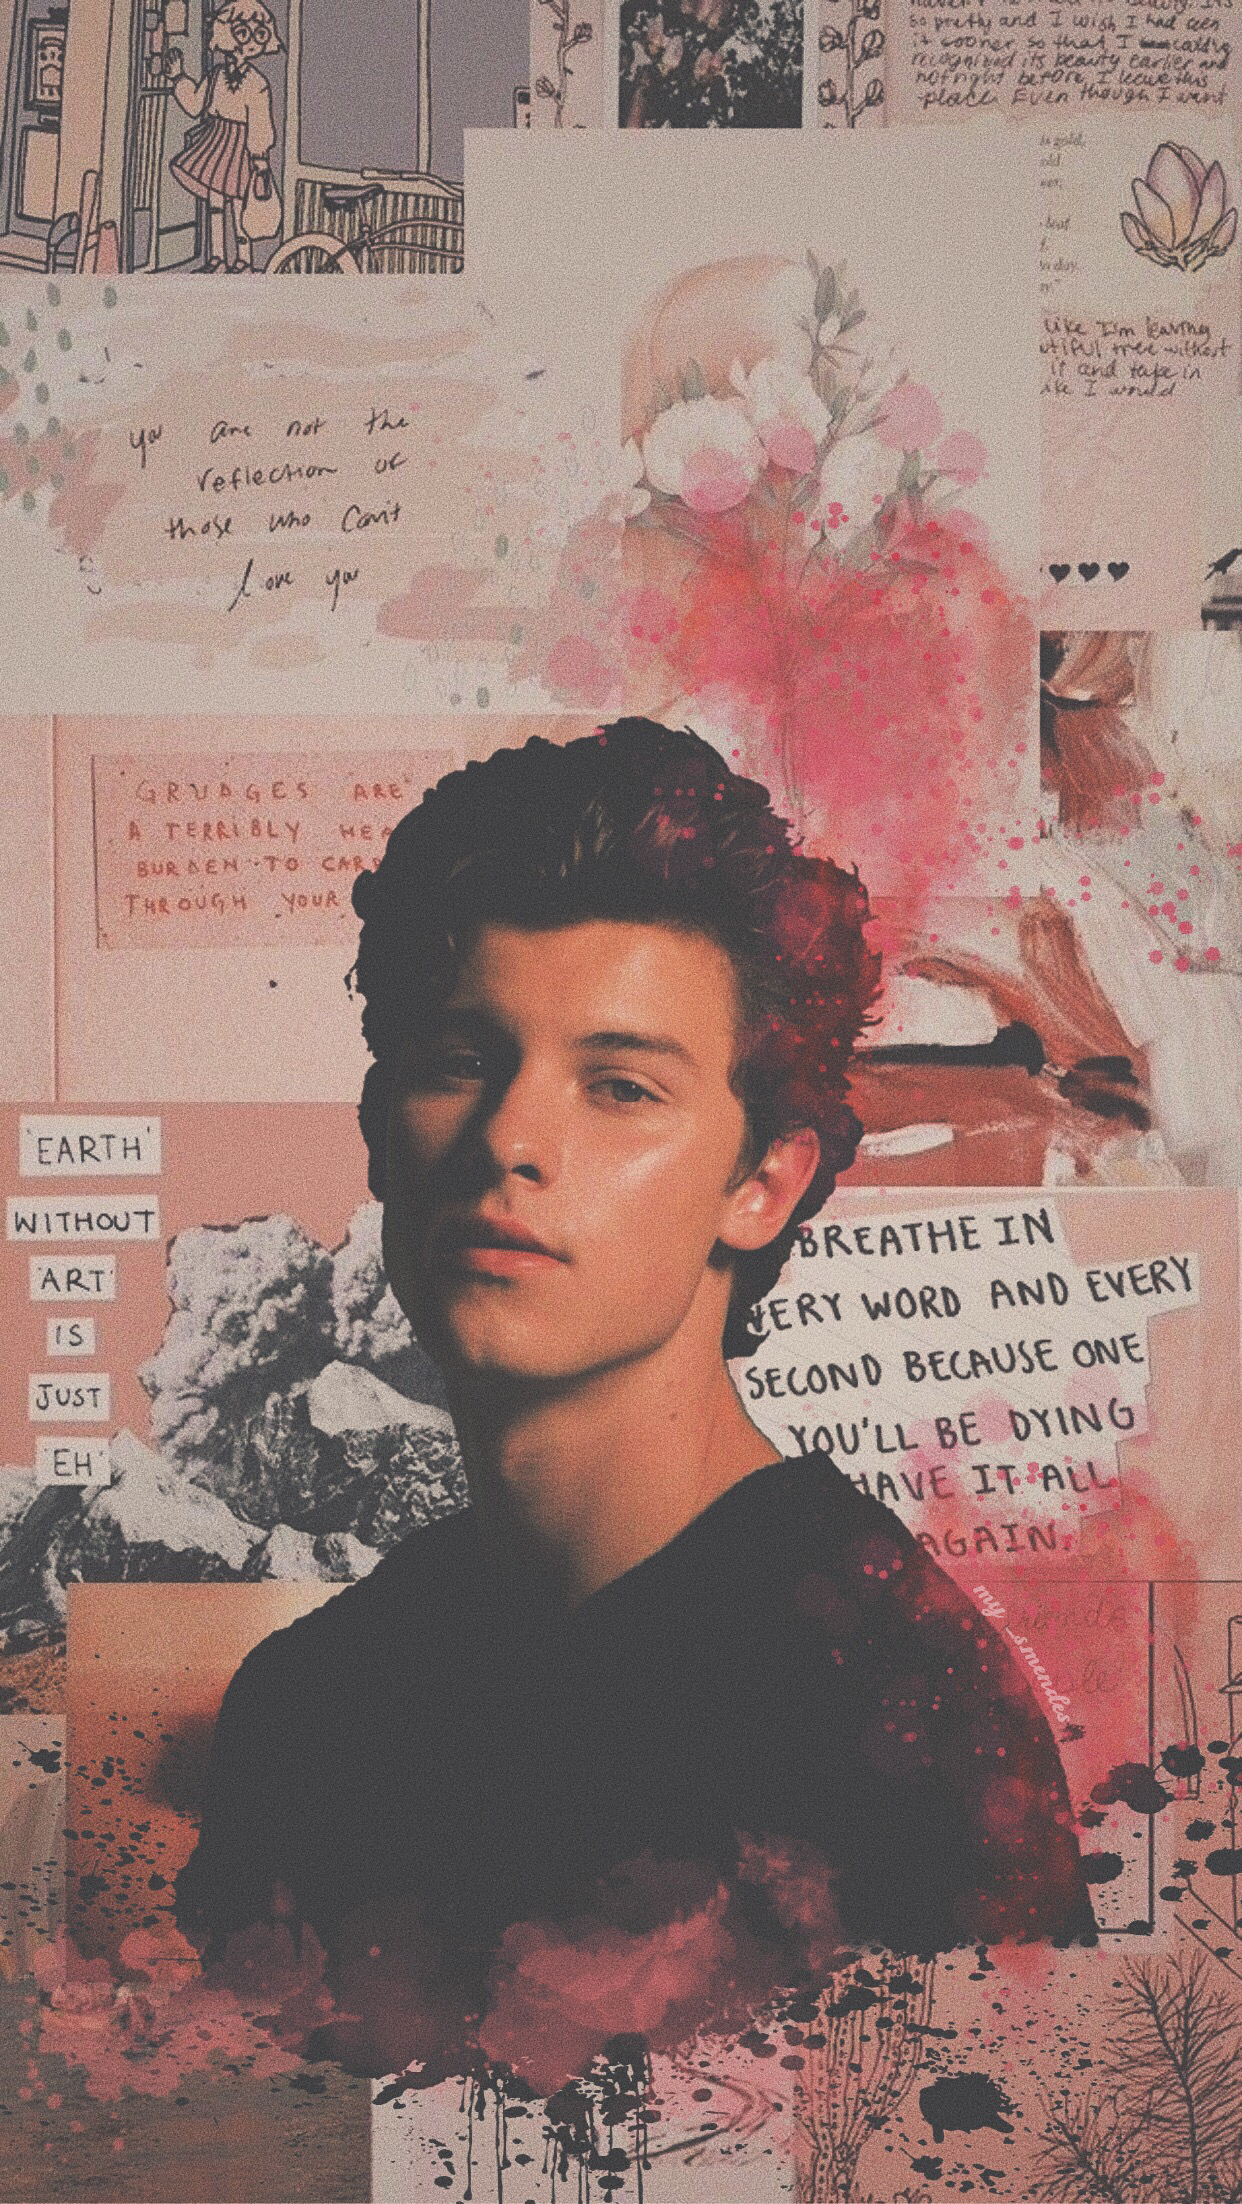 Shawn Mendes Netflix 2020 Wallpapers